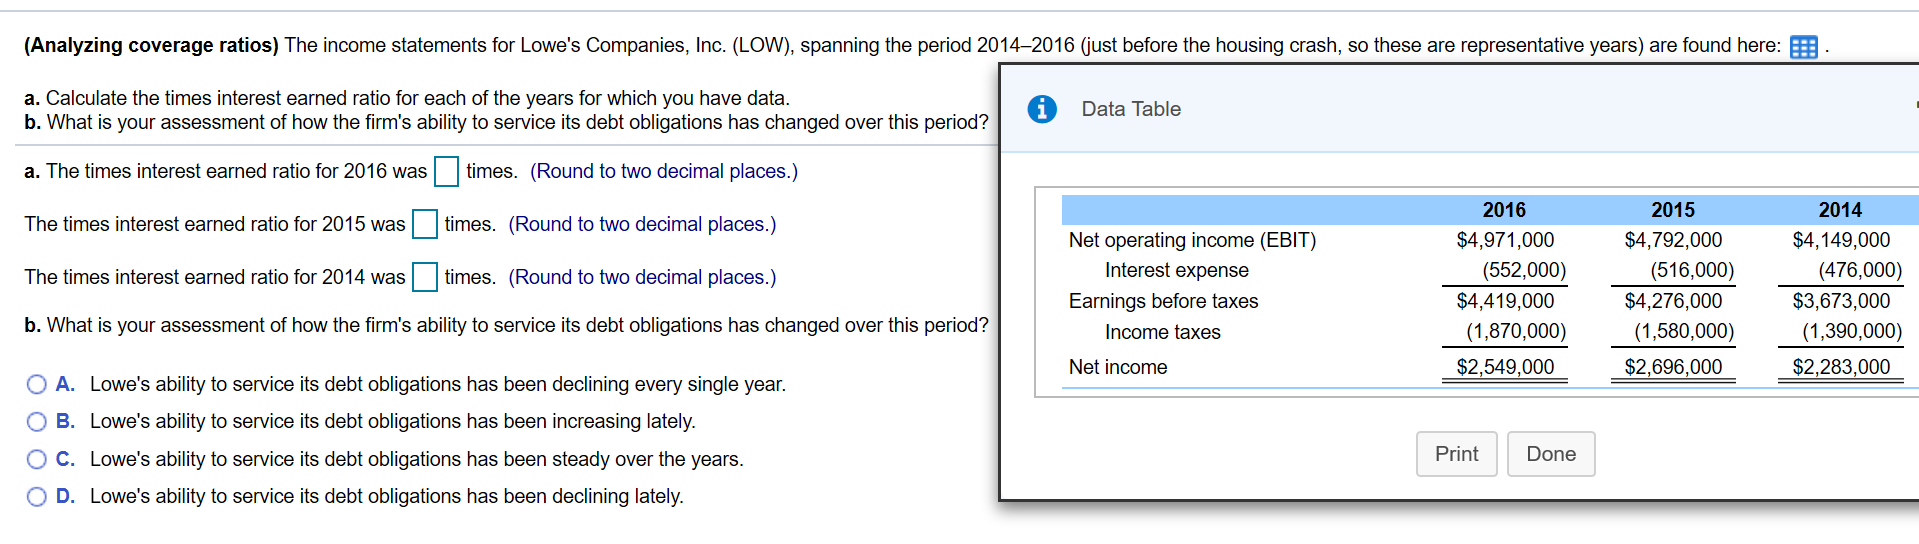 (Analyzing coverage ratios) The income statements for Lowe's Companies, Inc. (LOW), spanning the period 2014-2016 (just before the housing crash, so these are representative years) are found here:
a. Calculate the times interest earned ratio for each of the years for which you have data.
b. What is your assessment of how the firm's ability to service its debt obligations has changed over this period?
Data Table
a. The times interest earned ratio for 2016 was
times. (Round to two decimal places.)
2016
2015
2014
The times interest earned ratio for 2015 was
times. (Round to two decimal places.)
$4,971,000
$4,792,000
$4,149,000
Net operating income (EBIT)
Interest expense
(516,000)
(476,000)
(552,000)
The times interest earned ratio for 2014 was
times. (Round to two decimal places.)
$4,419,000
$4,276,000
$3,673,000
Earnings before taxes
b. What is your assessment of how the firm's ability to service its debt obligations has changed over this period?
(1,870,000)
(1,580,000)
(1,390,000)
Income taxes
$2,549,000
$2,696,000
$2,283,000
Net income
O A. Lowe's ability to service its debt obligations has been declining every single year.
O B. Lowe's ability to service its debt obligations has been increasing lately.
Print
Done
O C. Lowe's ability to service its debt obligations has been steady over the years.
O D. Lowe's ability to service its debt obligations has been declining lately.
